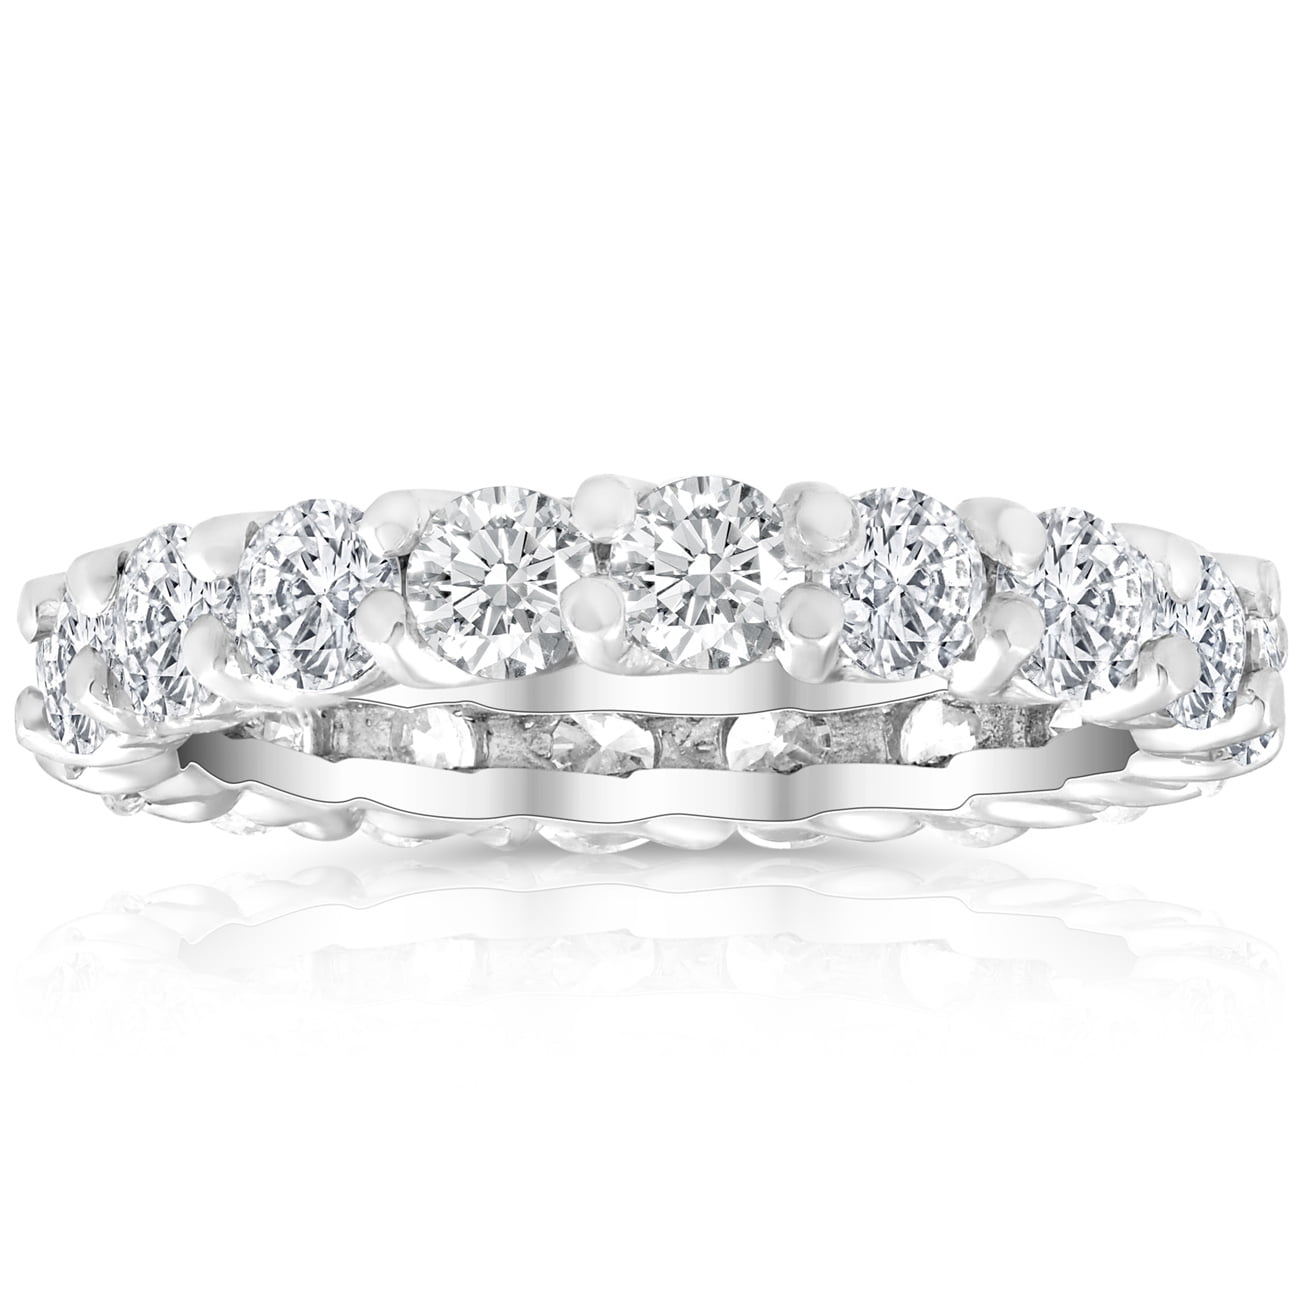 Diamond Vintage Eternity Wedding Band Solid 14k White Gold 0.50 CT For Women's 